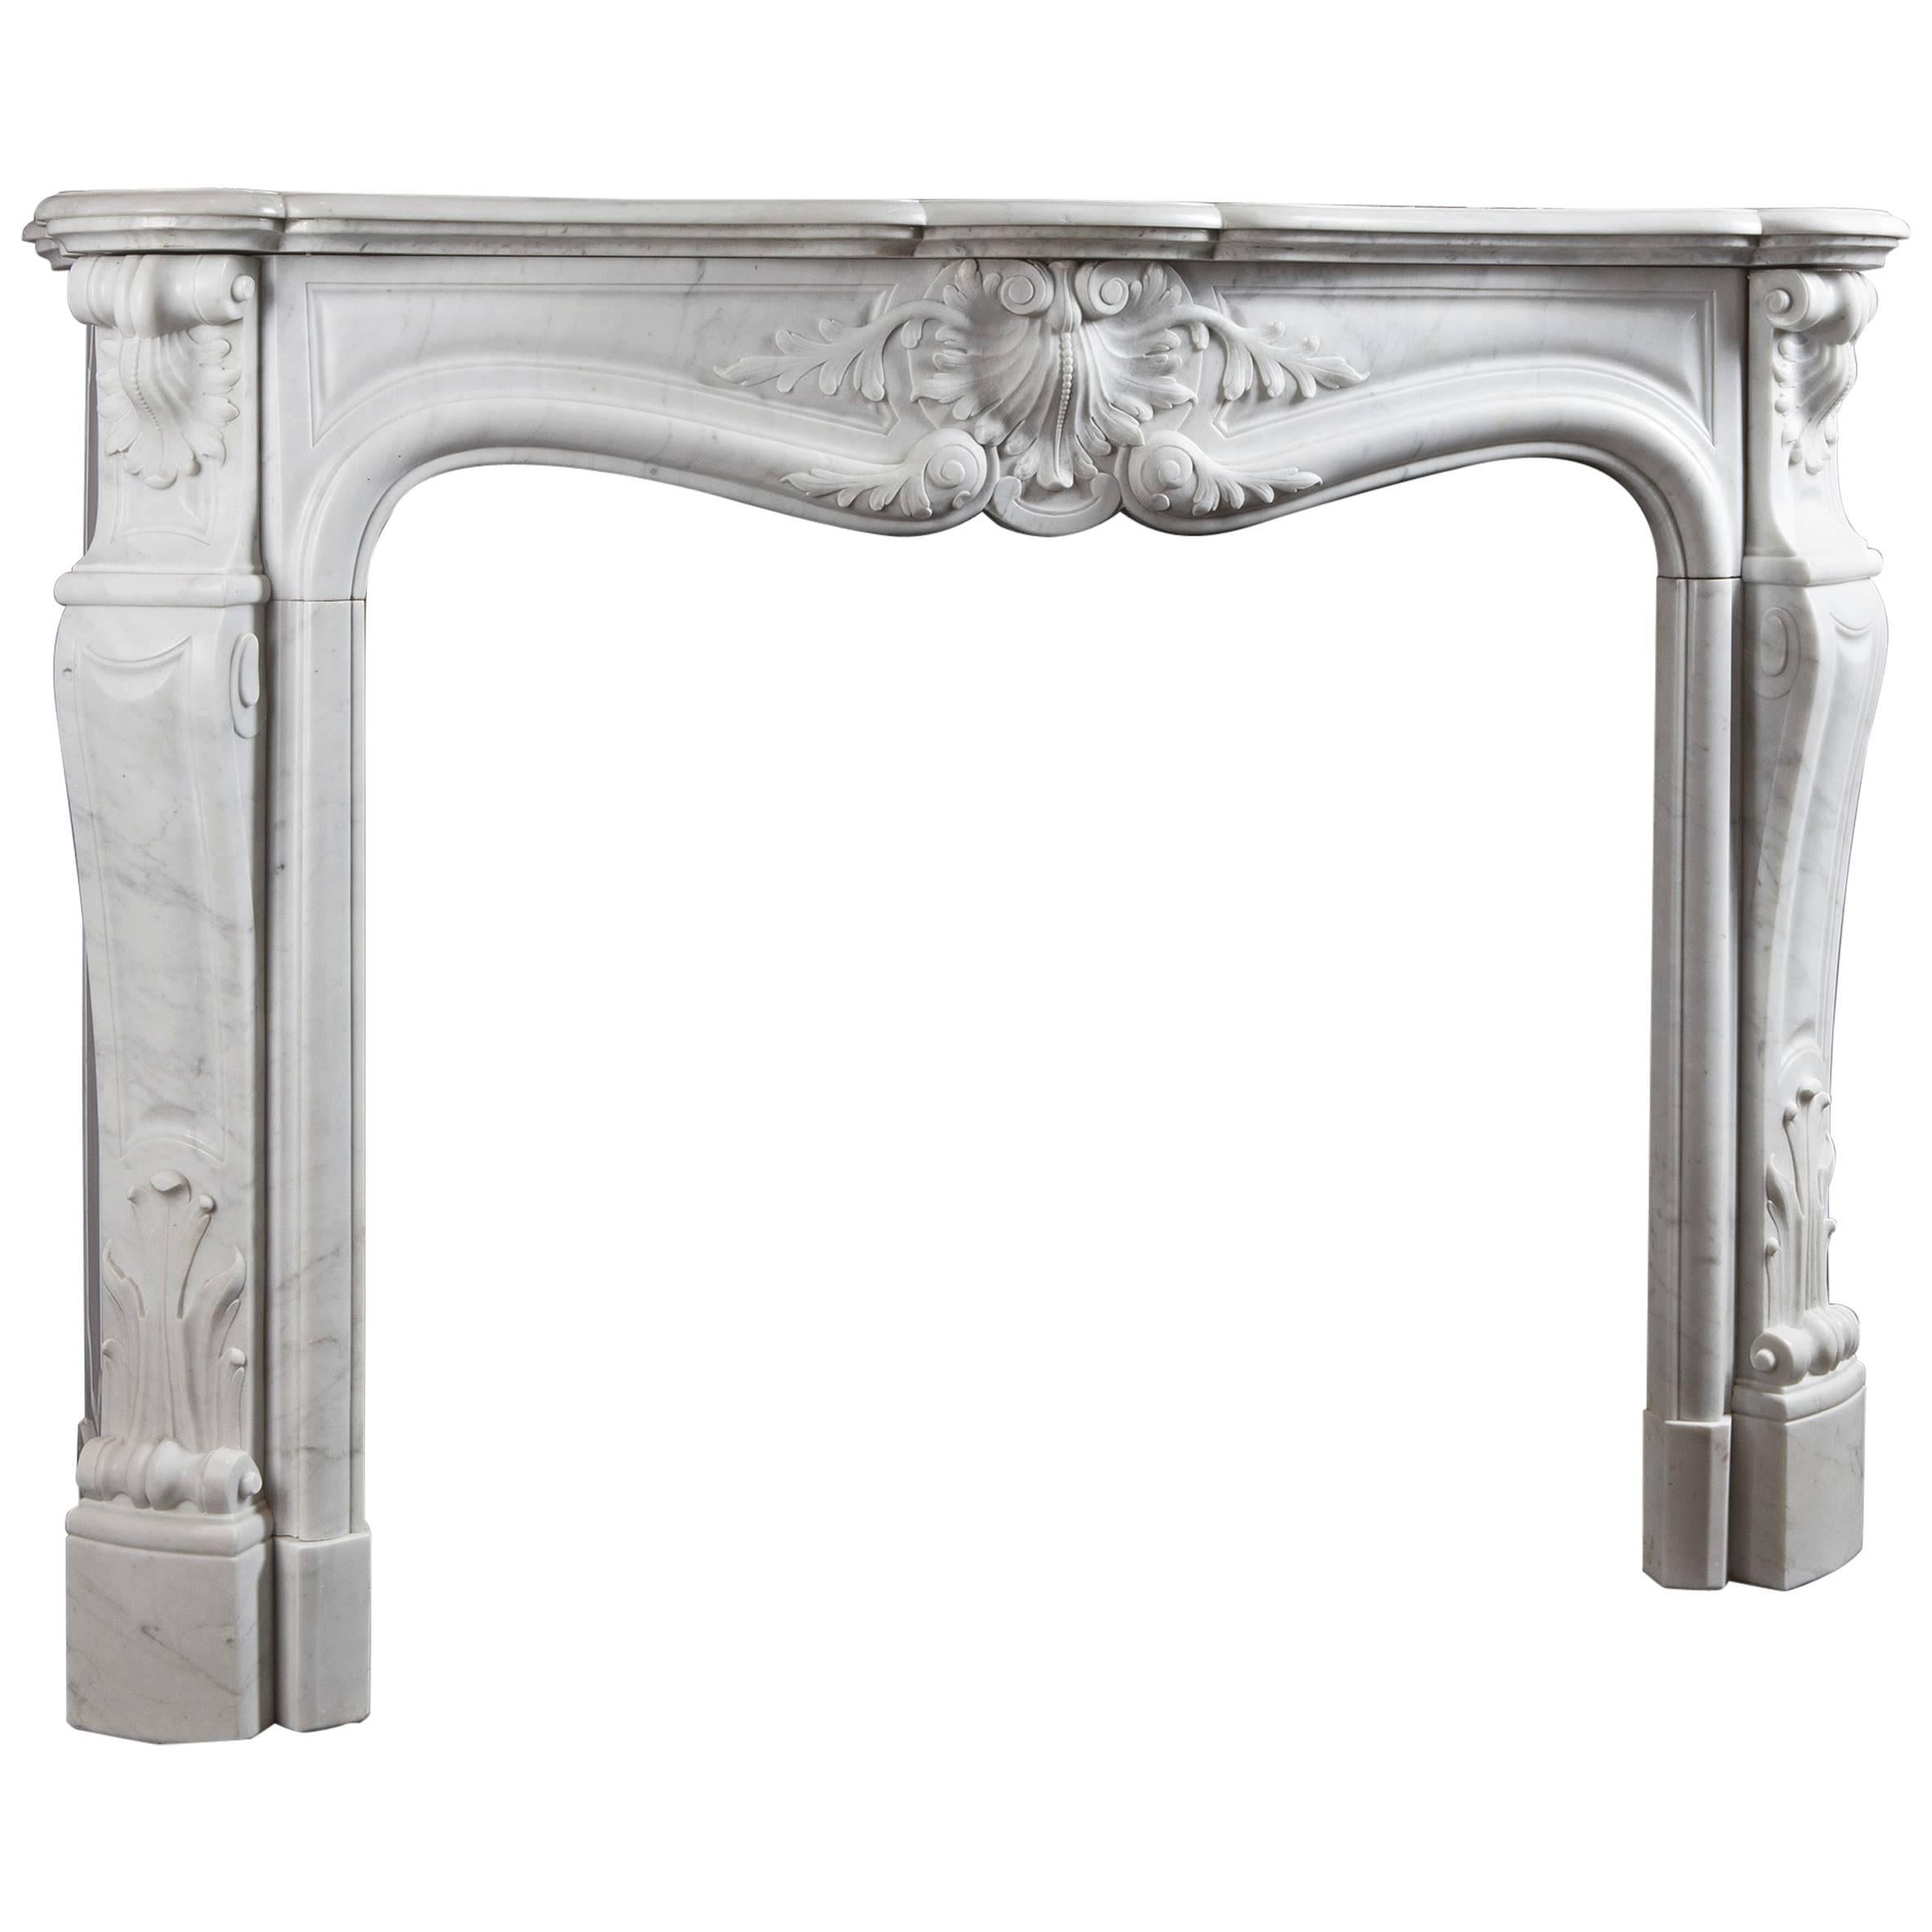 Very Fine Marble Sculpted "Trois Coquilles" Chimney/Mantle Piece